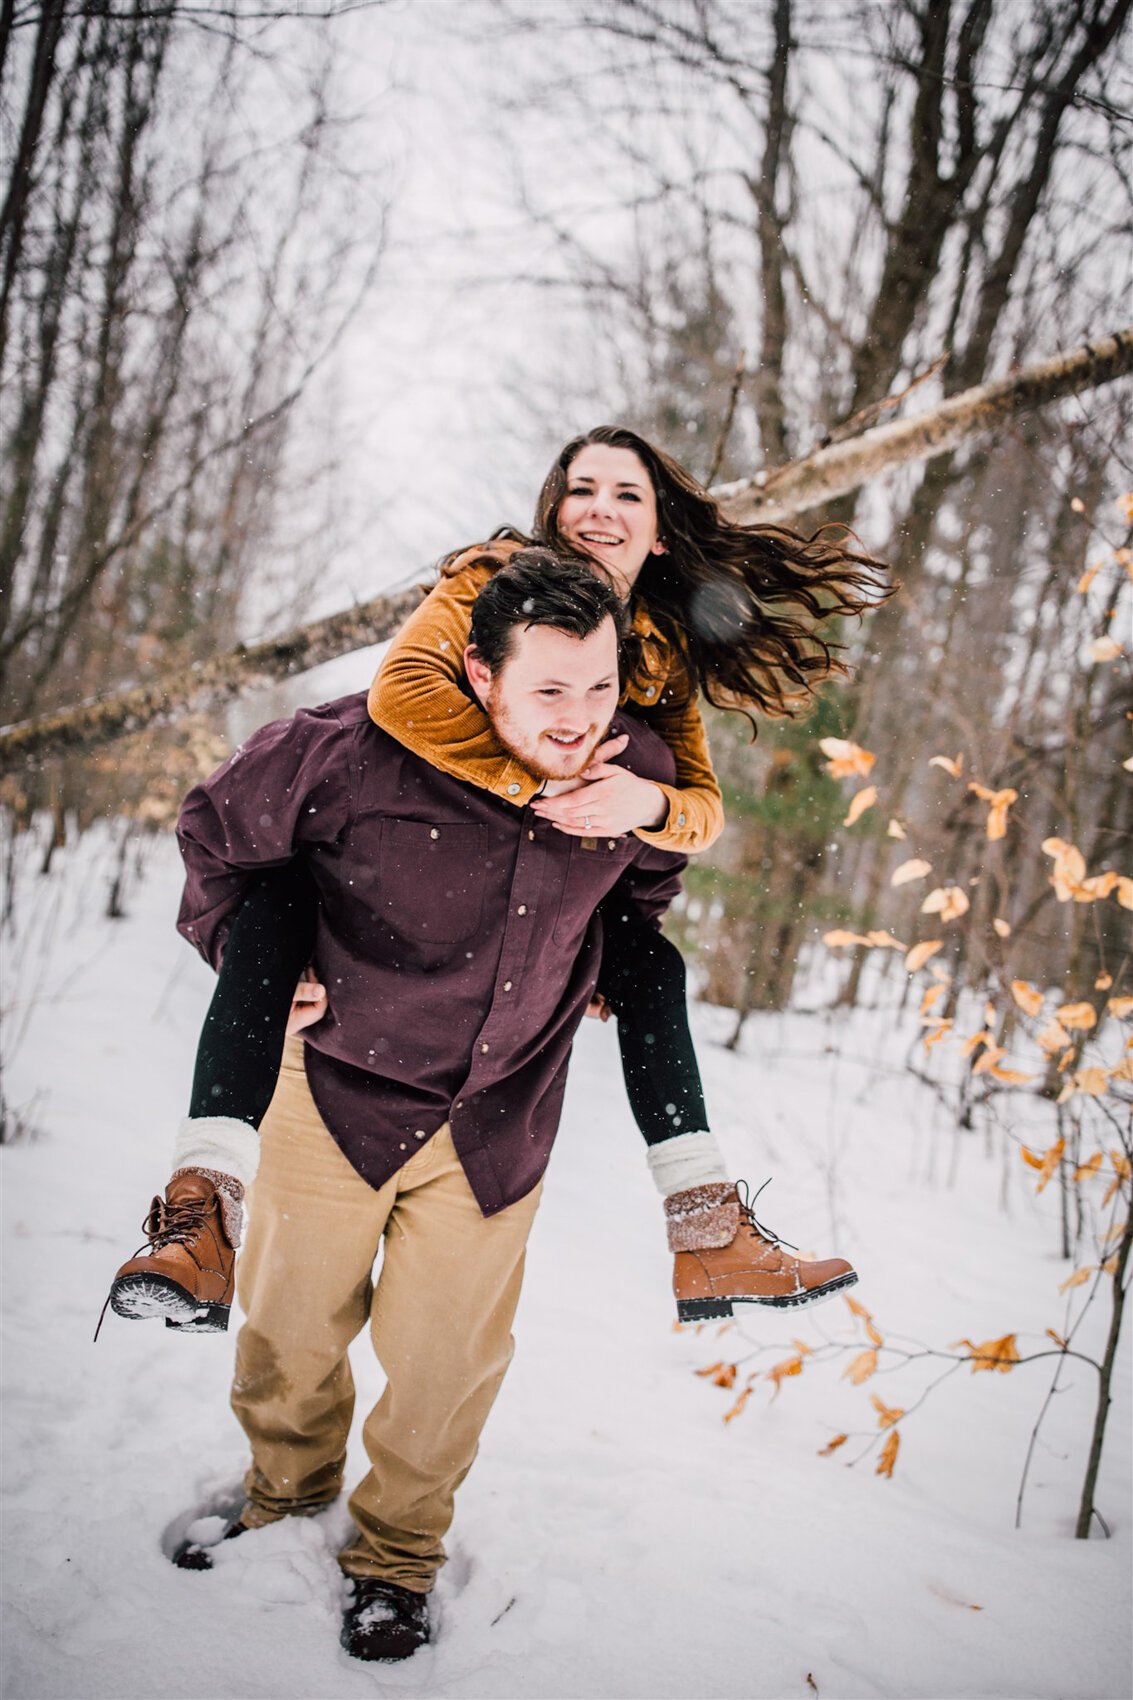 Carlie-and-Joe-Engagement-Pictures-Winter-2020-27.jpg